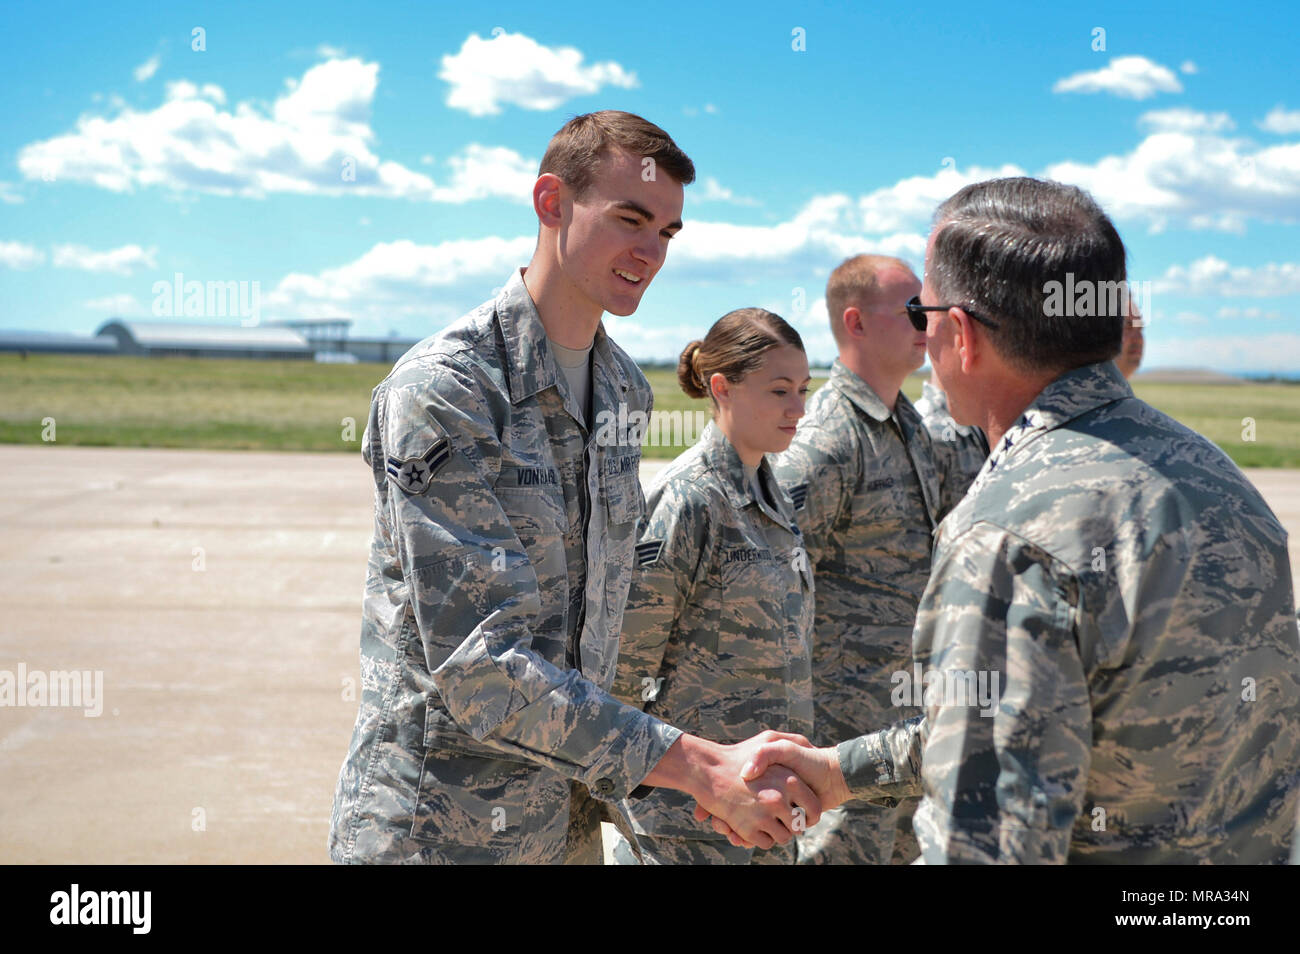 Gen. David L. Goldfein, Chief of Staff of the U.S. Air Force, gives Airman 1st Class Christopher Von Haasl, 140th Maintenance Squadron F-16 Fighting Falcon hydraulics technician, a coin in recognition of his hard work during his visit May 25, 2017, on Buckley Air Force Base, Colo. During his visit, Goldfein walked through several static displays for a mission brief from the 140th Wing, met with space operators from the 460th Operations Group and toured the Aerospace Data-Facility-Colorado. (U.S. Air Force photo by Airman 1st Class Holden S. Faul/ Released) Stock Photo